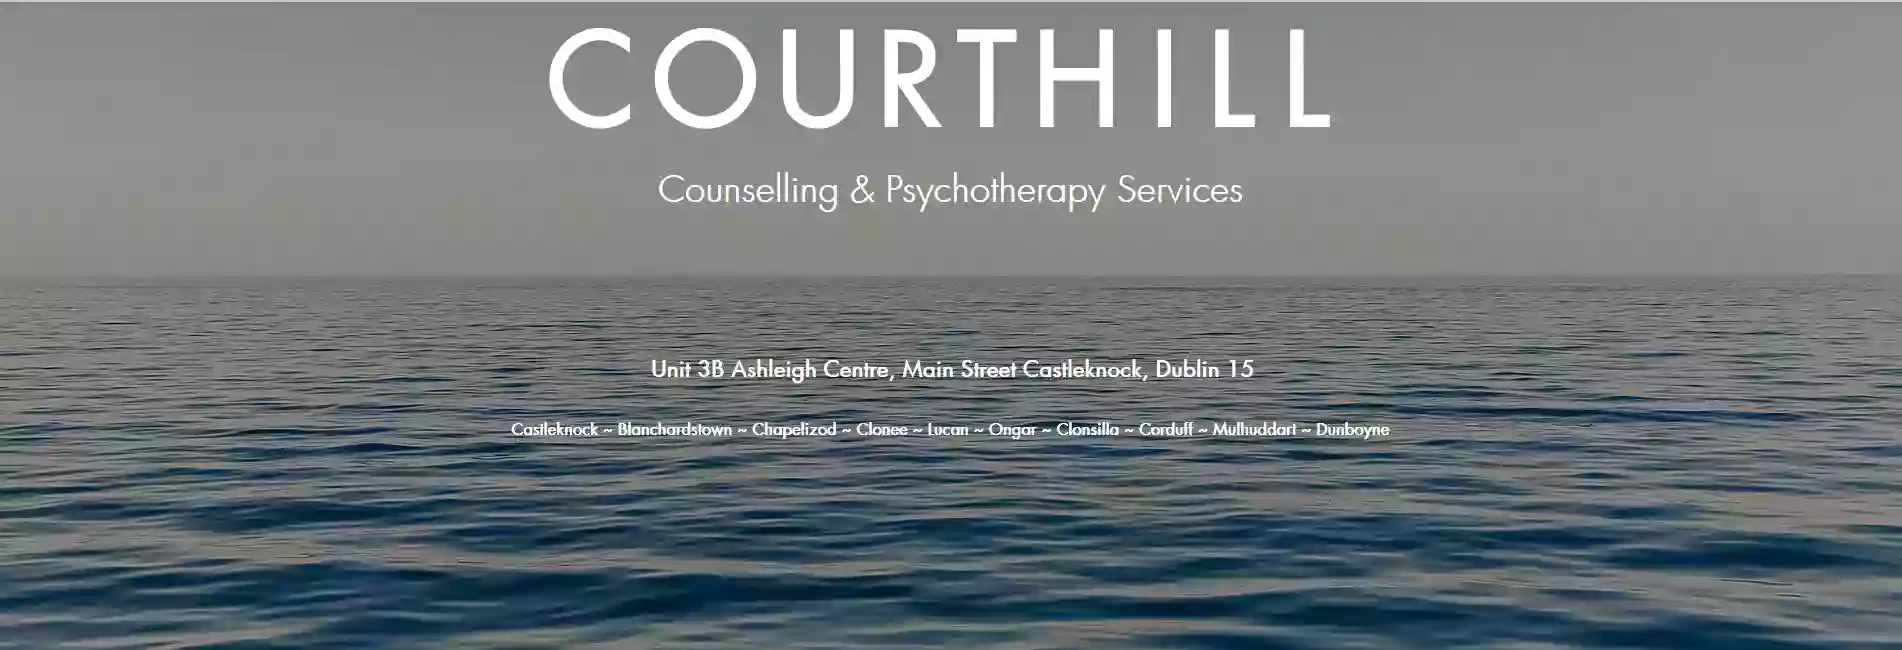 Courthill Counselling & Psychotherapy Services